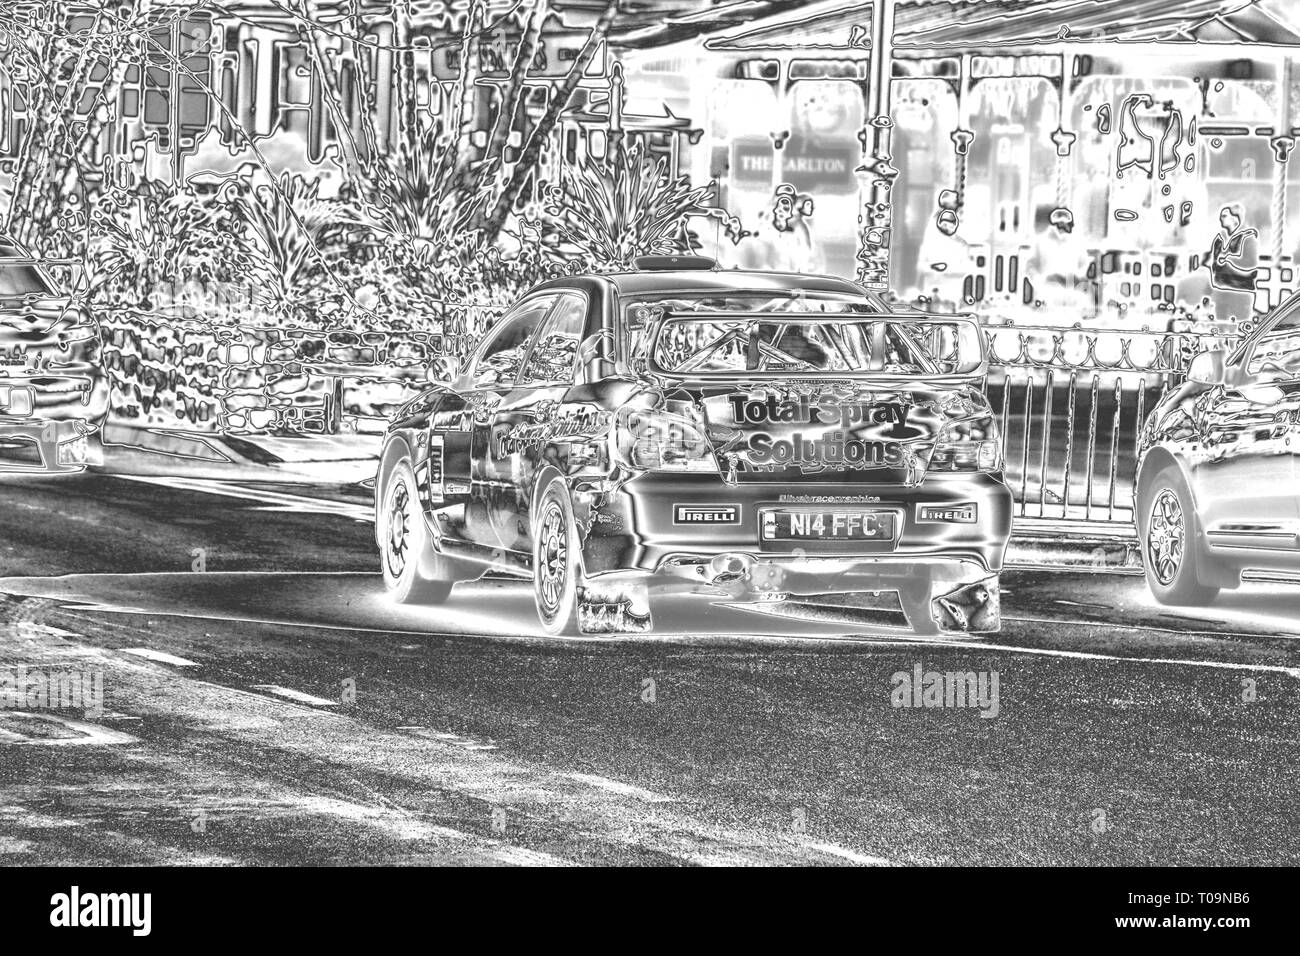 The Cambrian Rally in Llandudno, The images have a chrome effect which gives the image a metallic look Stock Photo